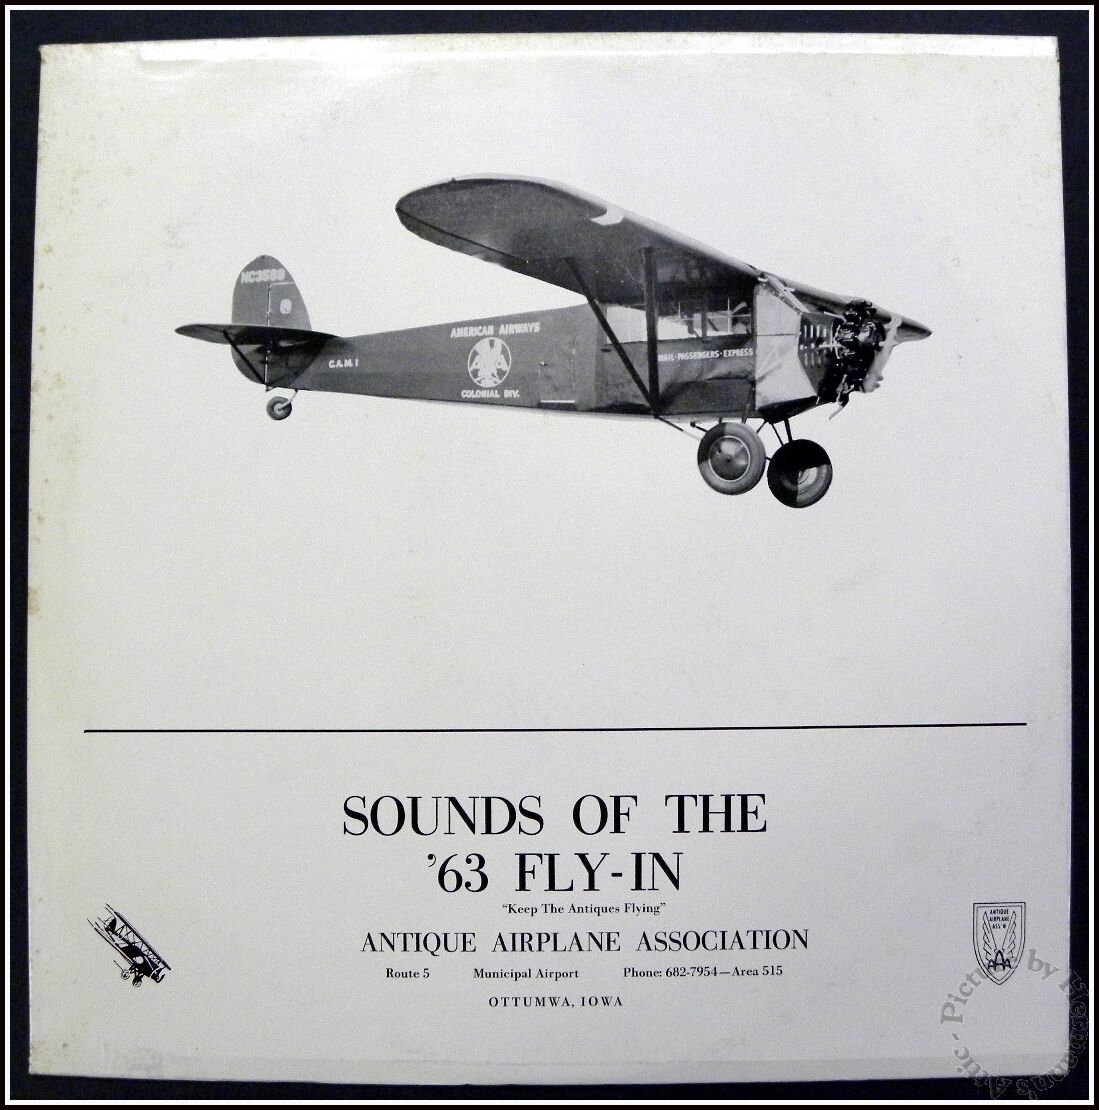 Sounds of the '63 Fly-In, Antique Airplane Assn. Century Recording 17593 Vinyl